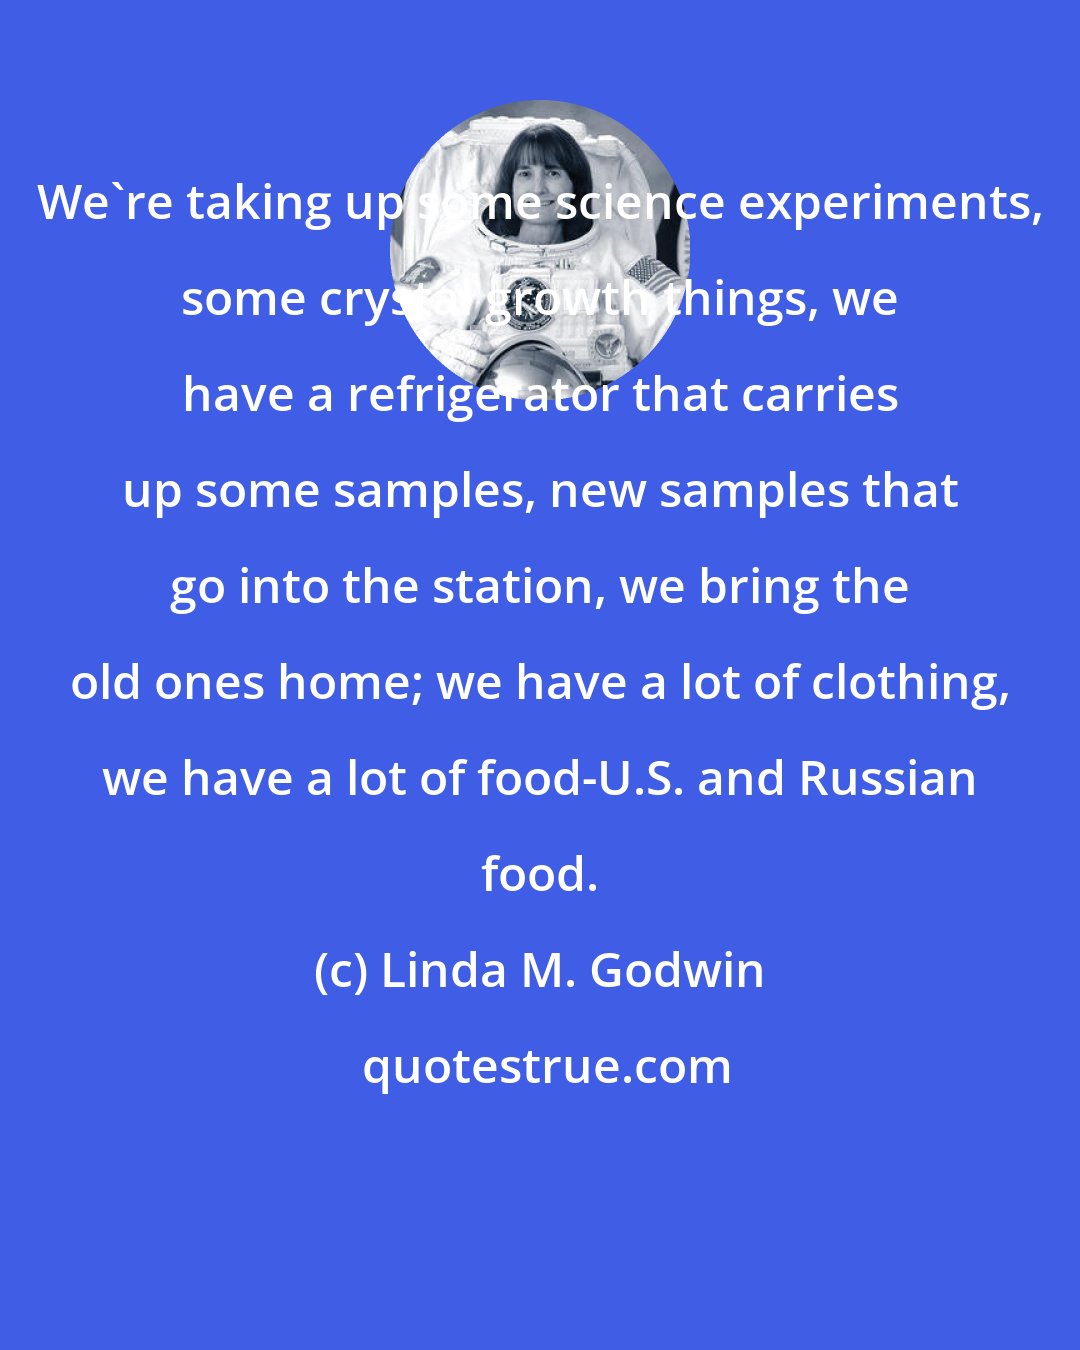 Linda M. Godwin: We're taking up some science experiments, some crystal growth things, we have a refrigerator that carries up some samples, new samples that go into the station, we bring the old ones home; we have a lot of clothing, we have a lot of food-U.S. and Russian food.